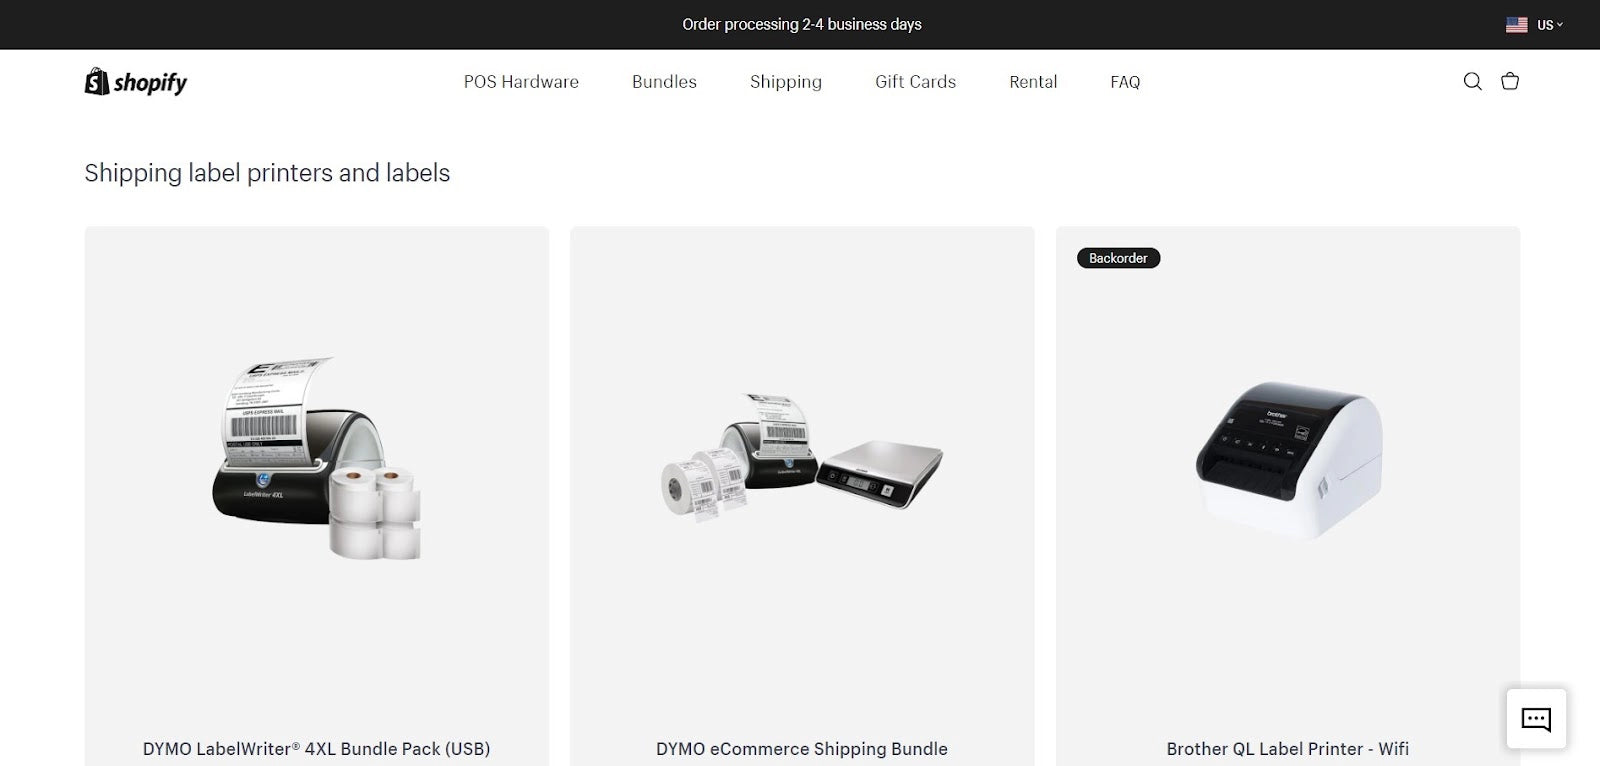 Shopify hardware - Shipping label printers and labels